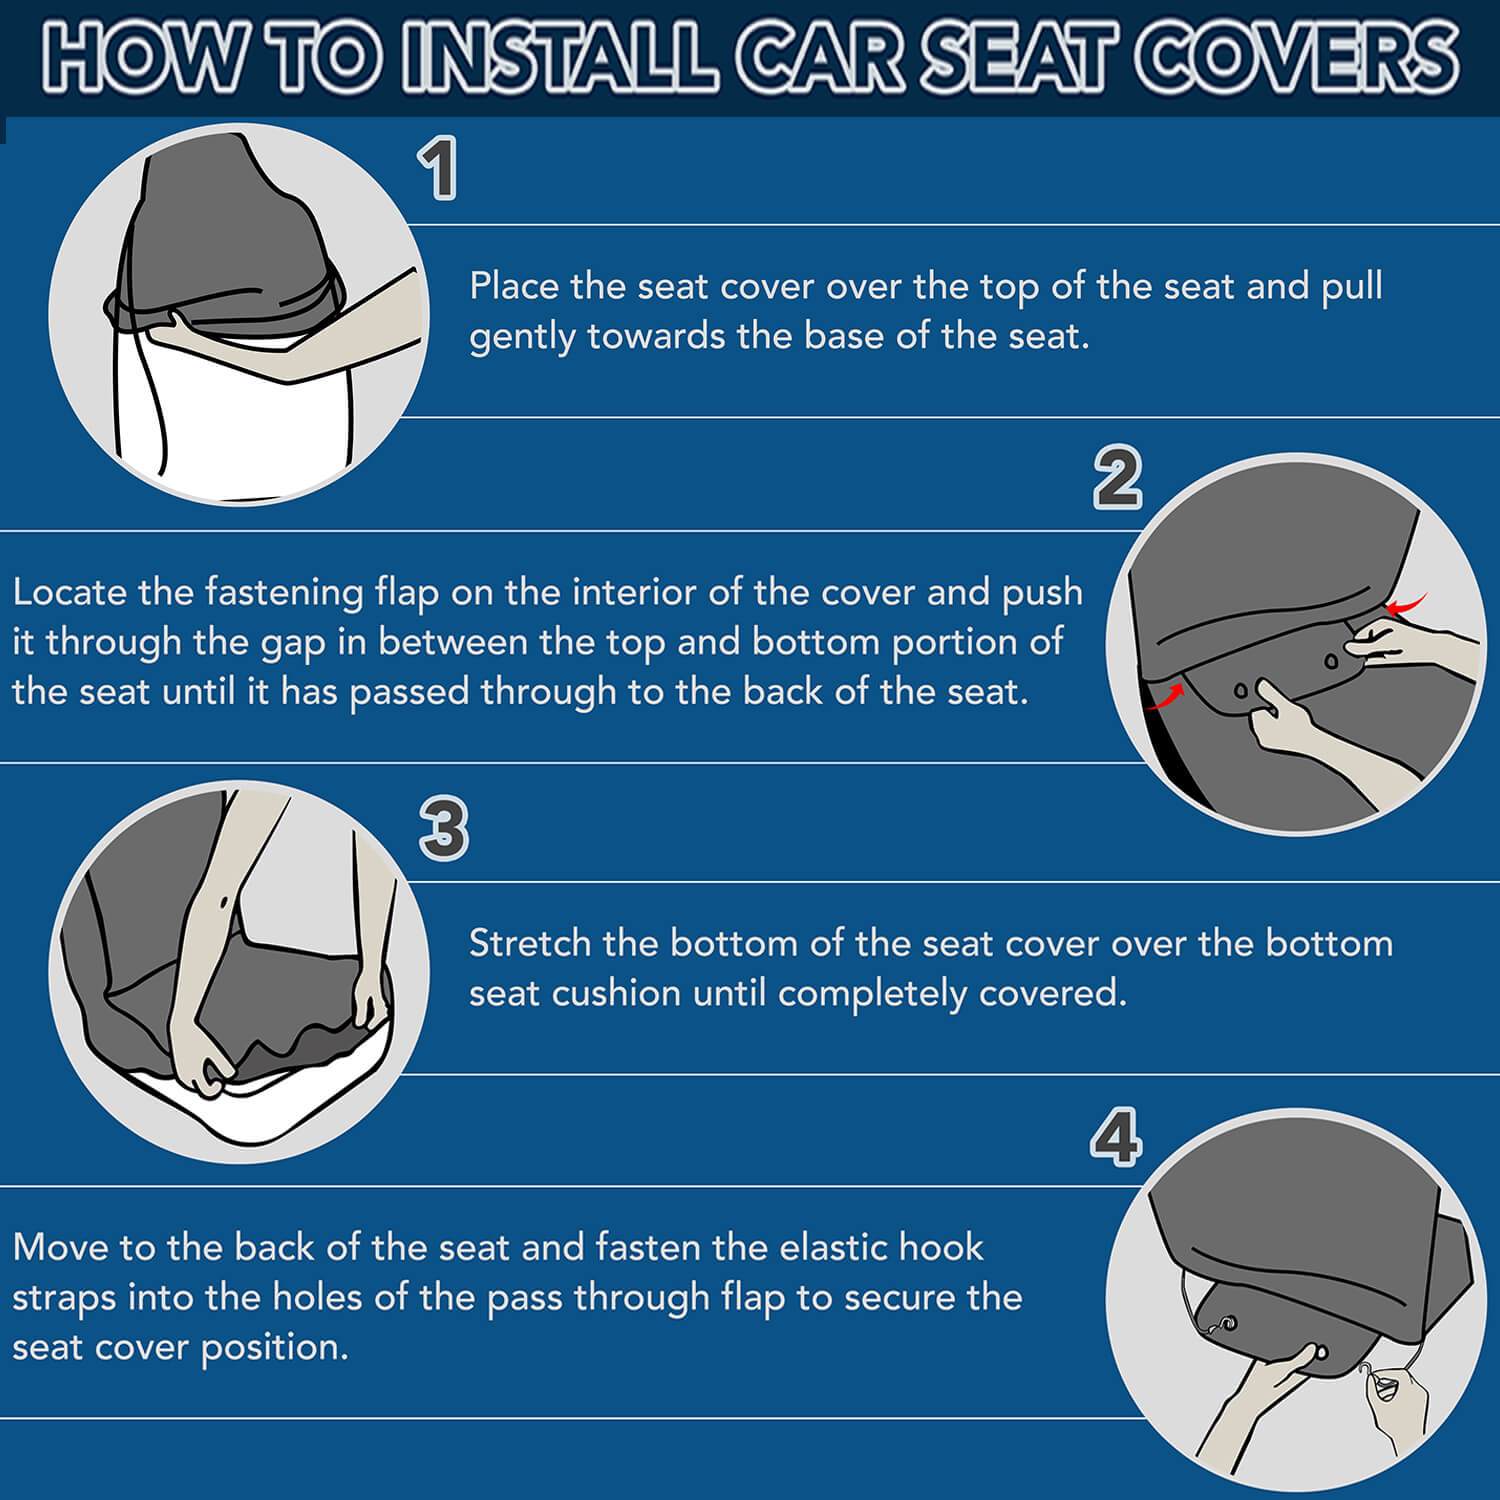 WonderBlackGirl Car Seat Covers Installation Guide - How To Install